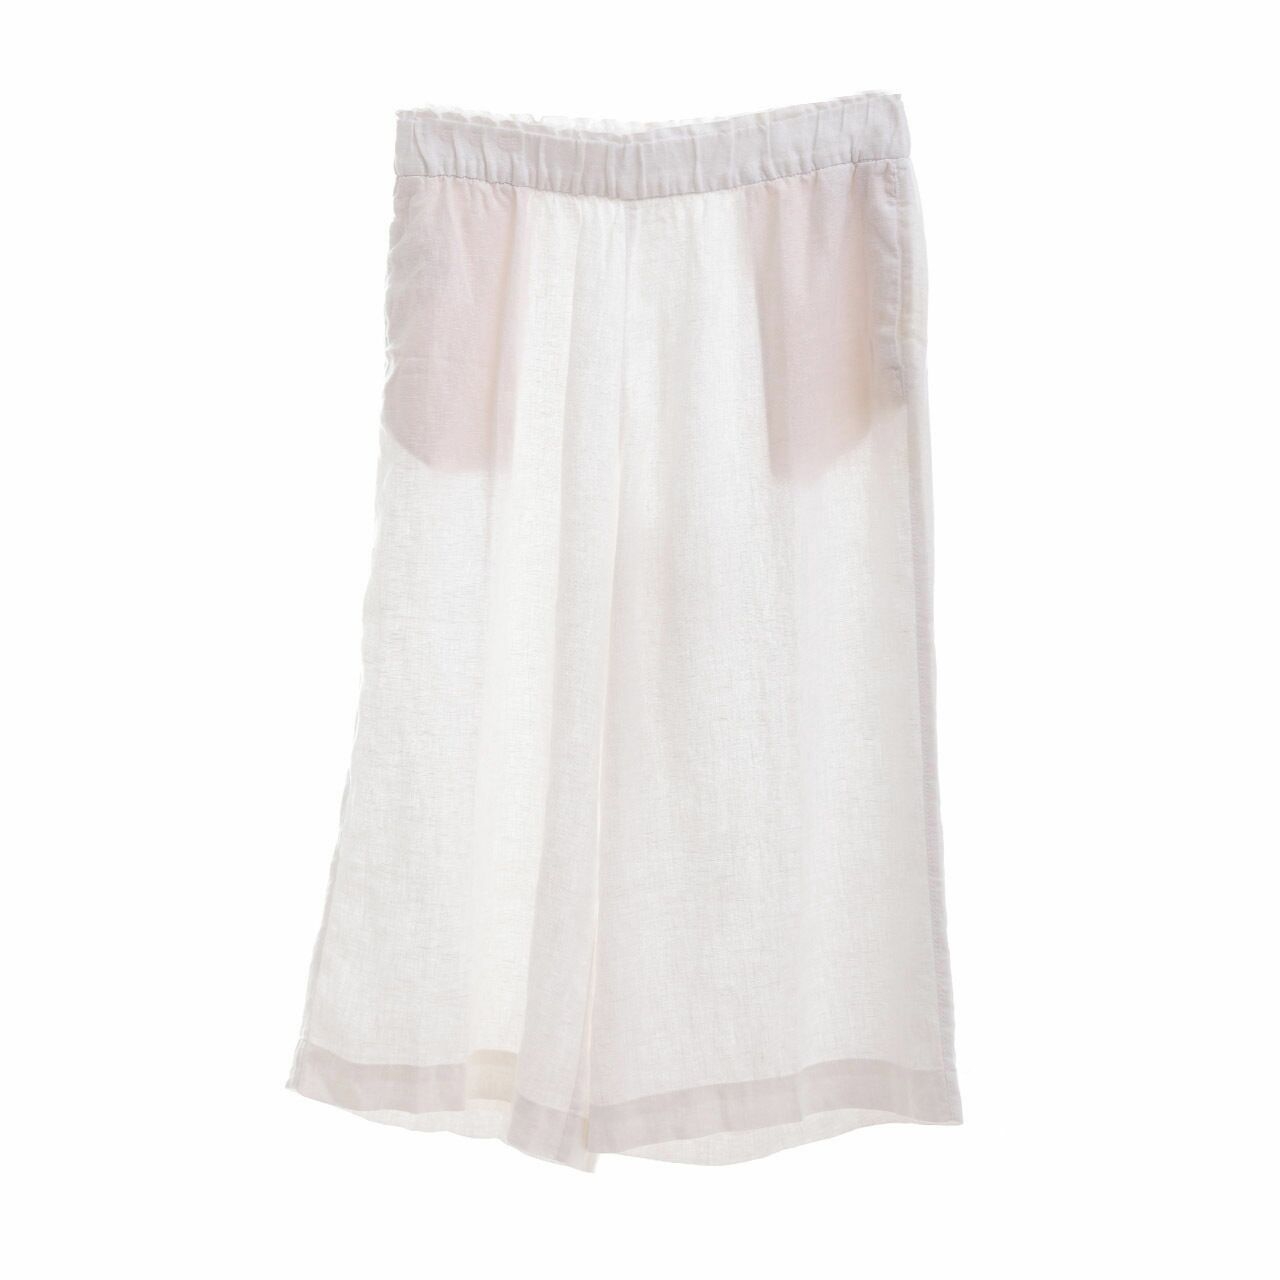 Marks & Spencer White Culottes Long Pants